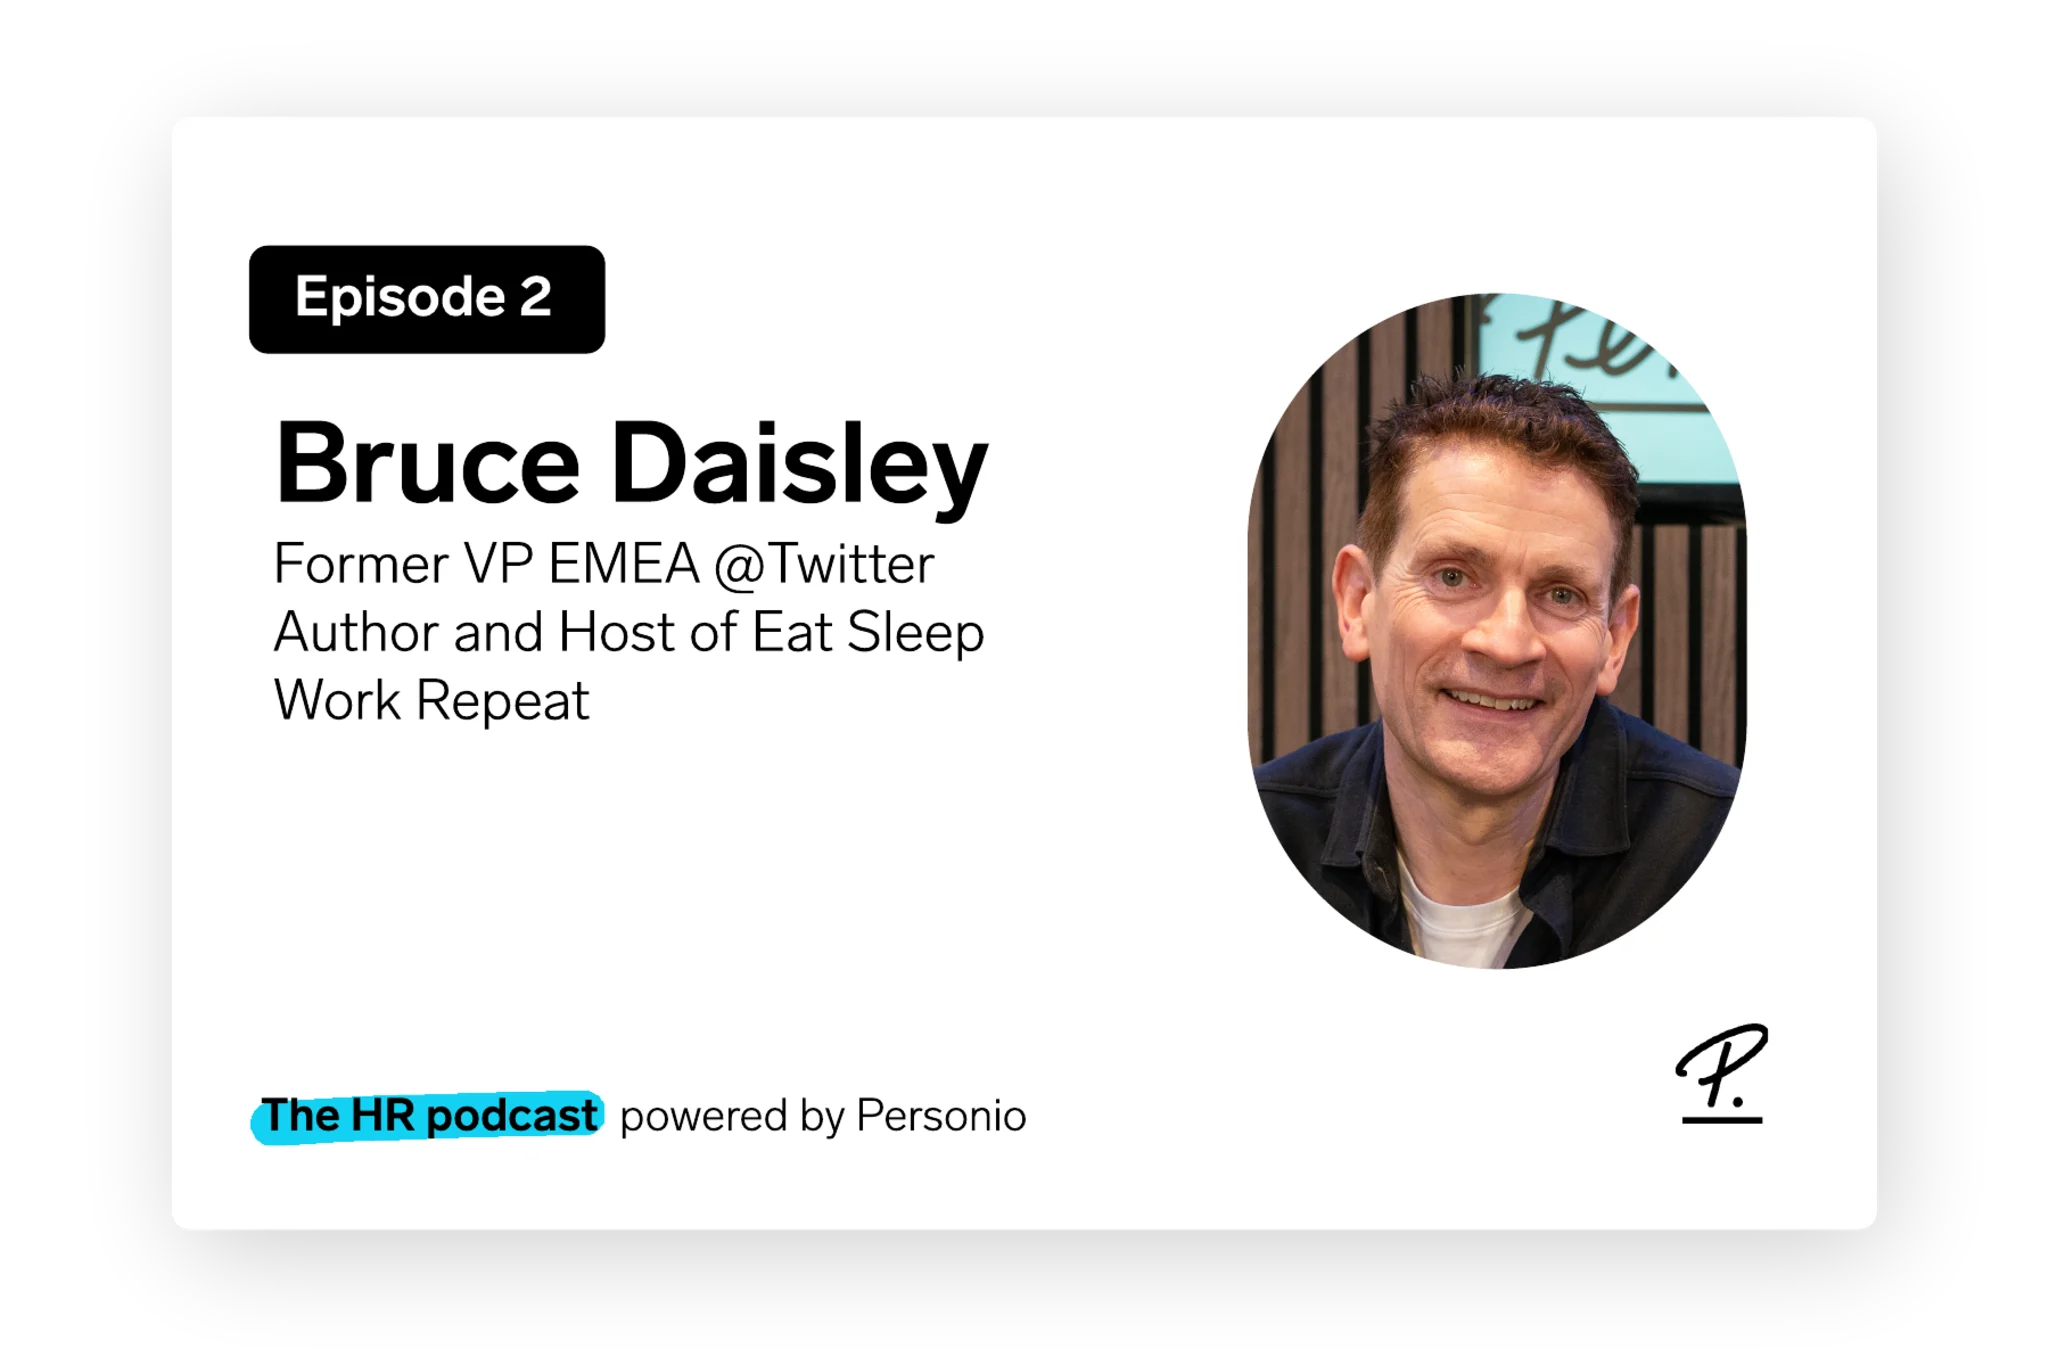 Podcast with Bruce Daisley